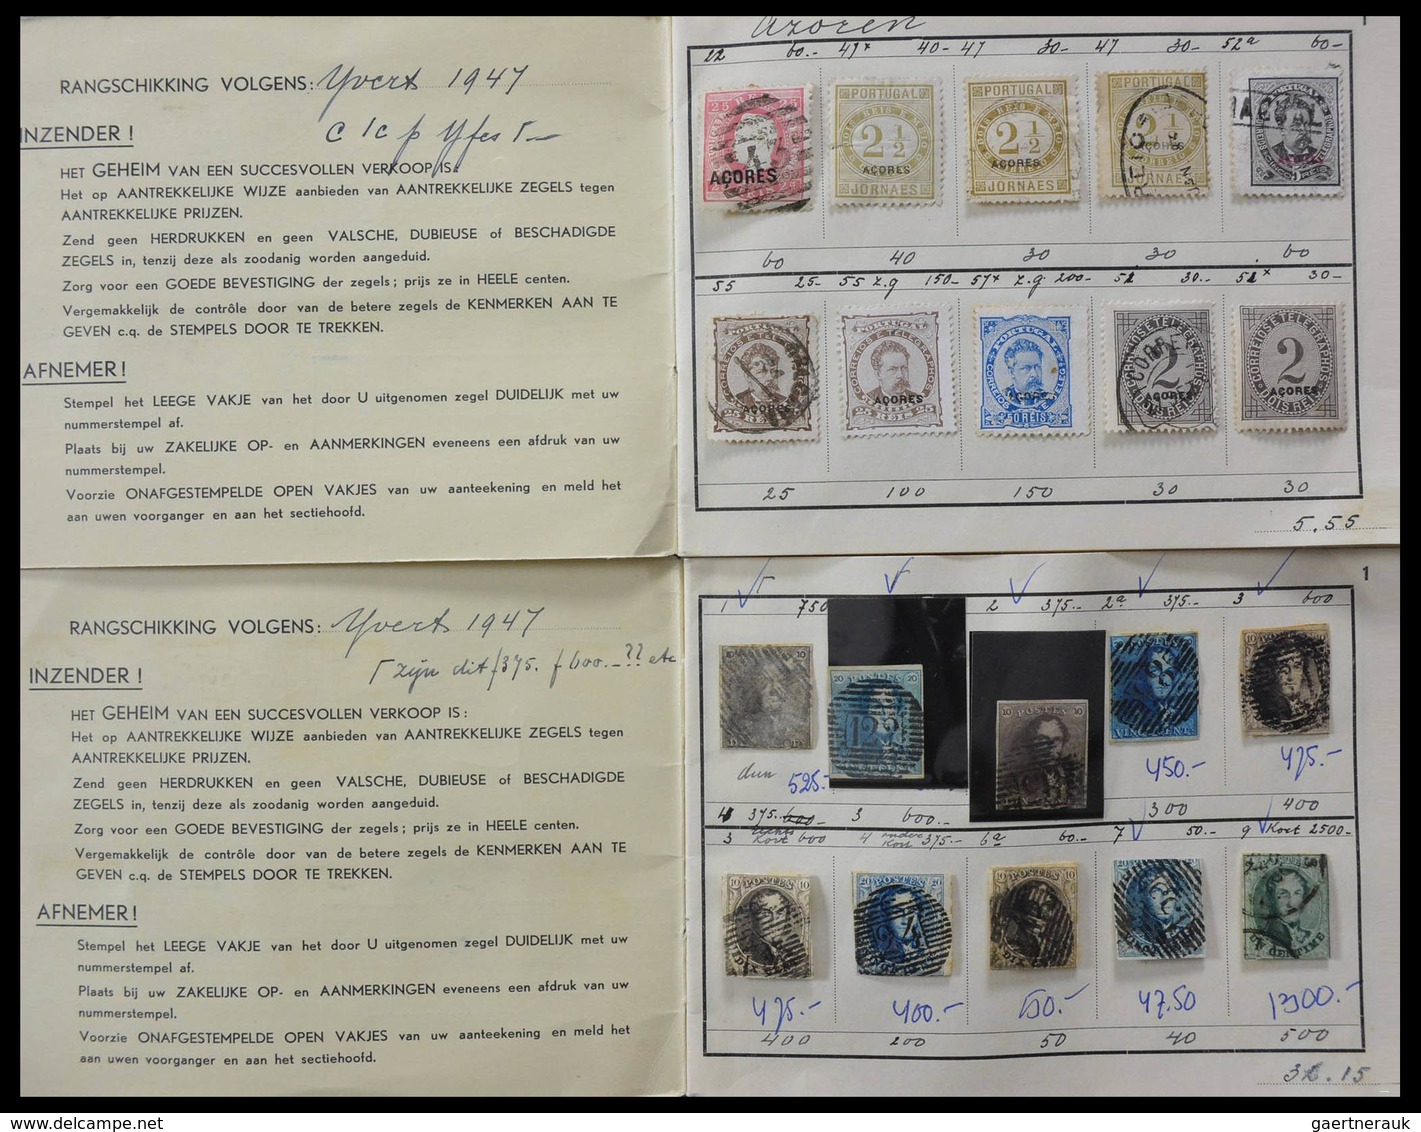 Alle Welt: Incredible lot of ancient approval booklets from 1947, all very wellfilled, offered intac